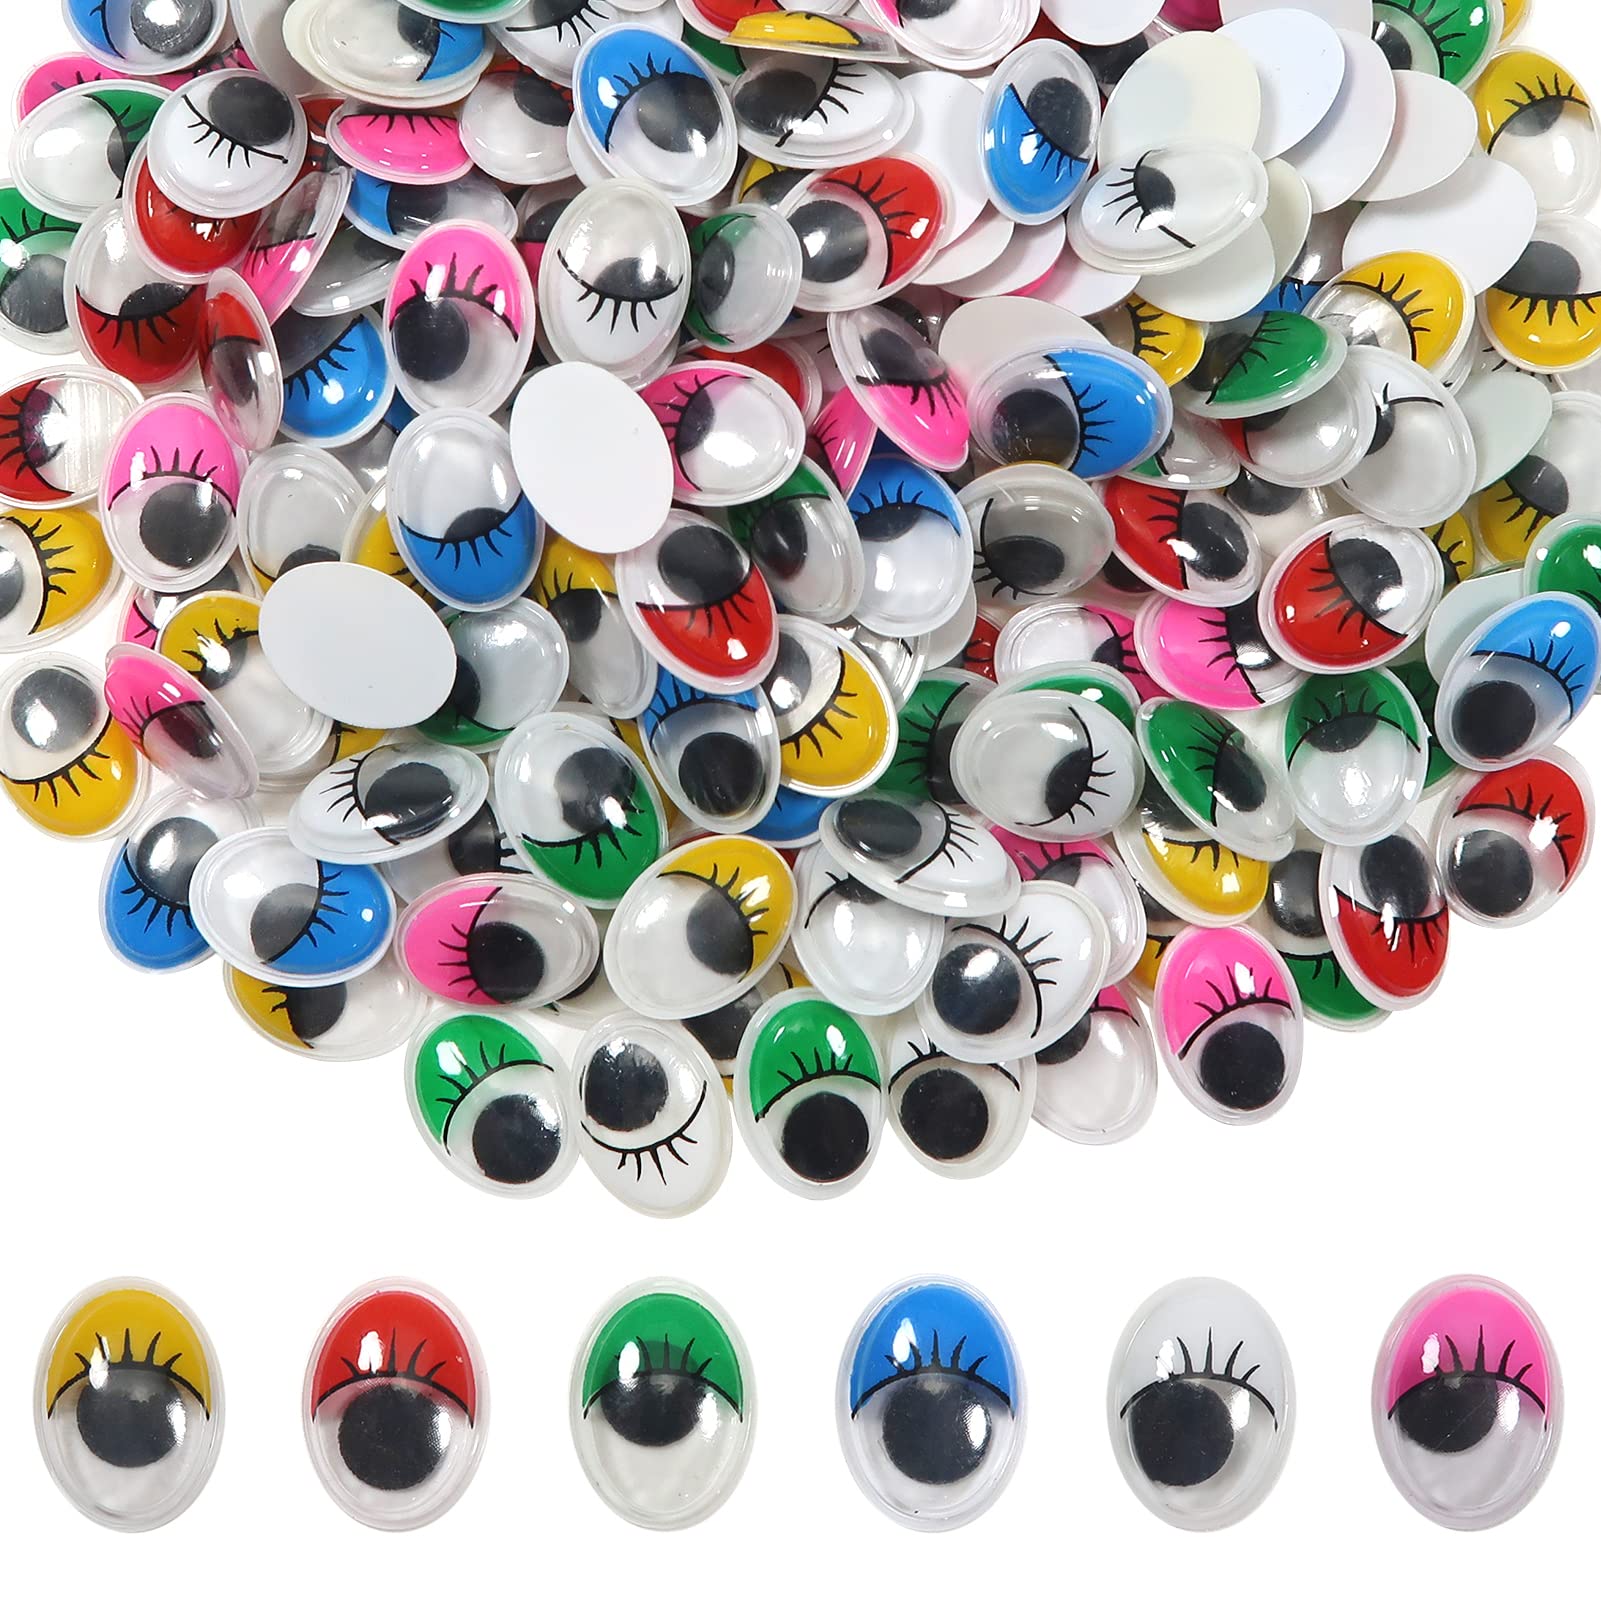 BEADNOVA Wiggle Eyes for Crafts Self Adhesive Googly Eyes for Crafting  Sticky Wiggly Google Eye for DIY Craft Scrapbooking 700pcs  Multicolors,Assorted Sizes price in Doha Qatar